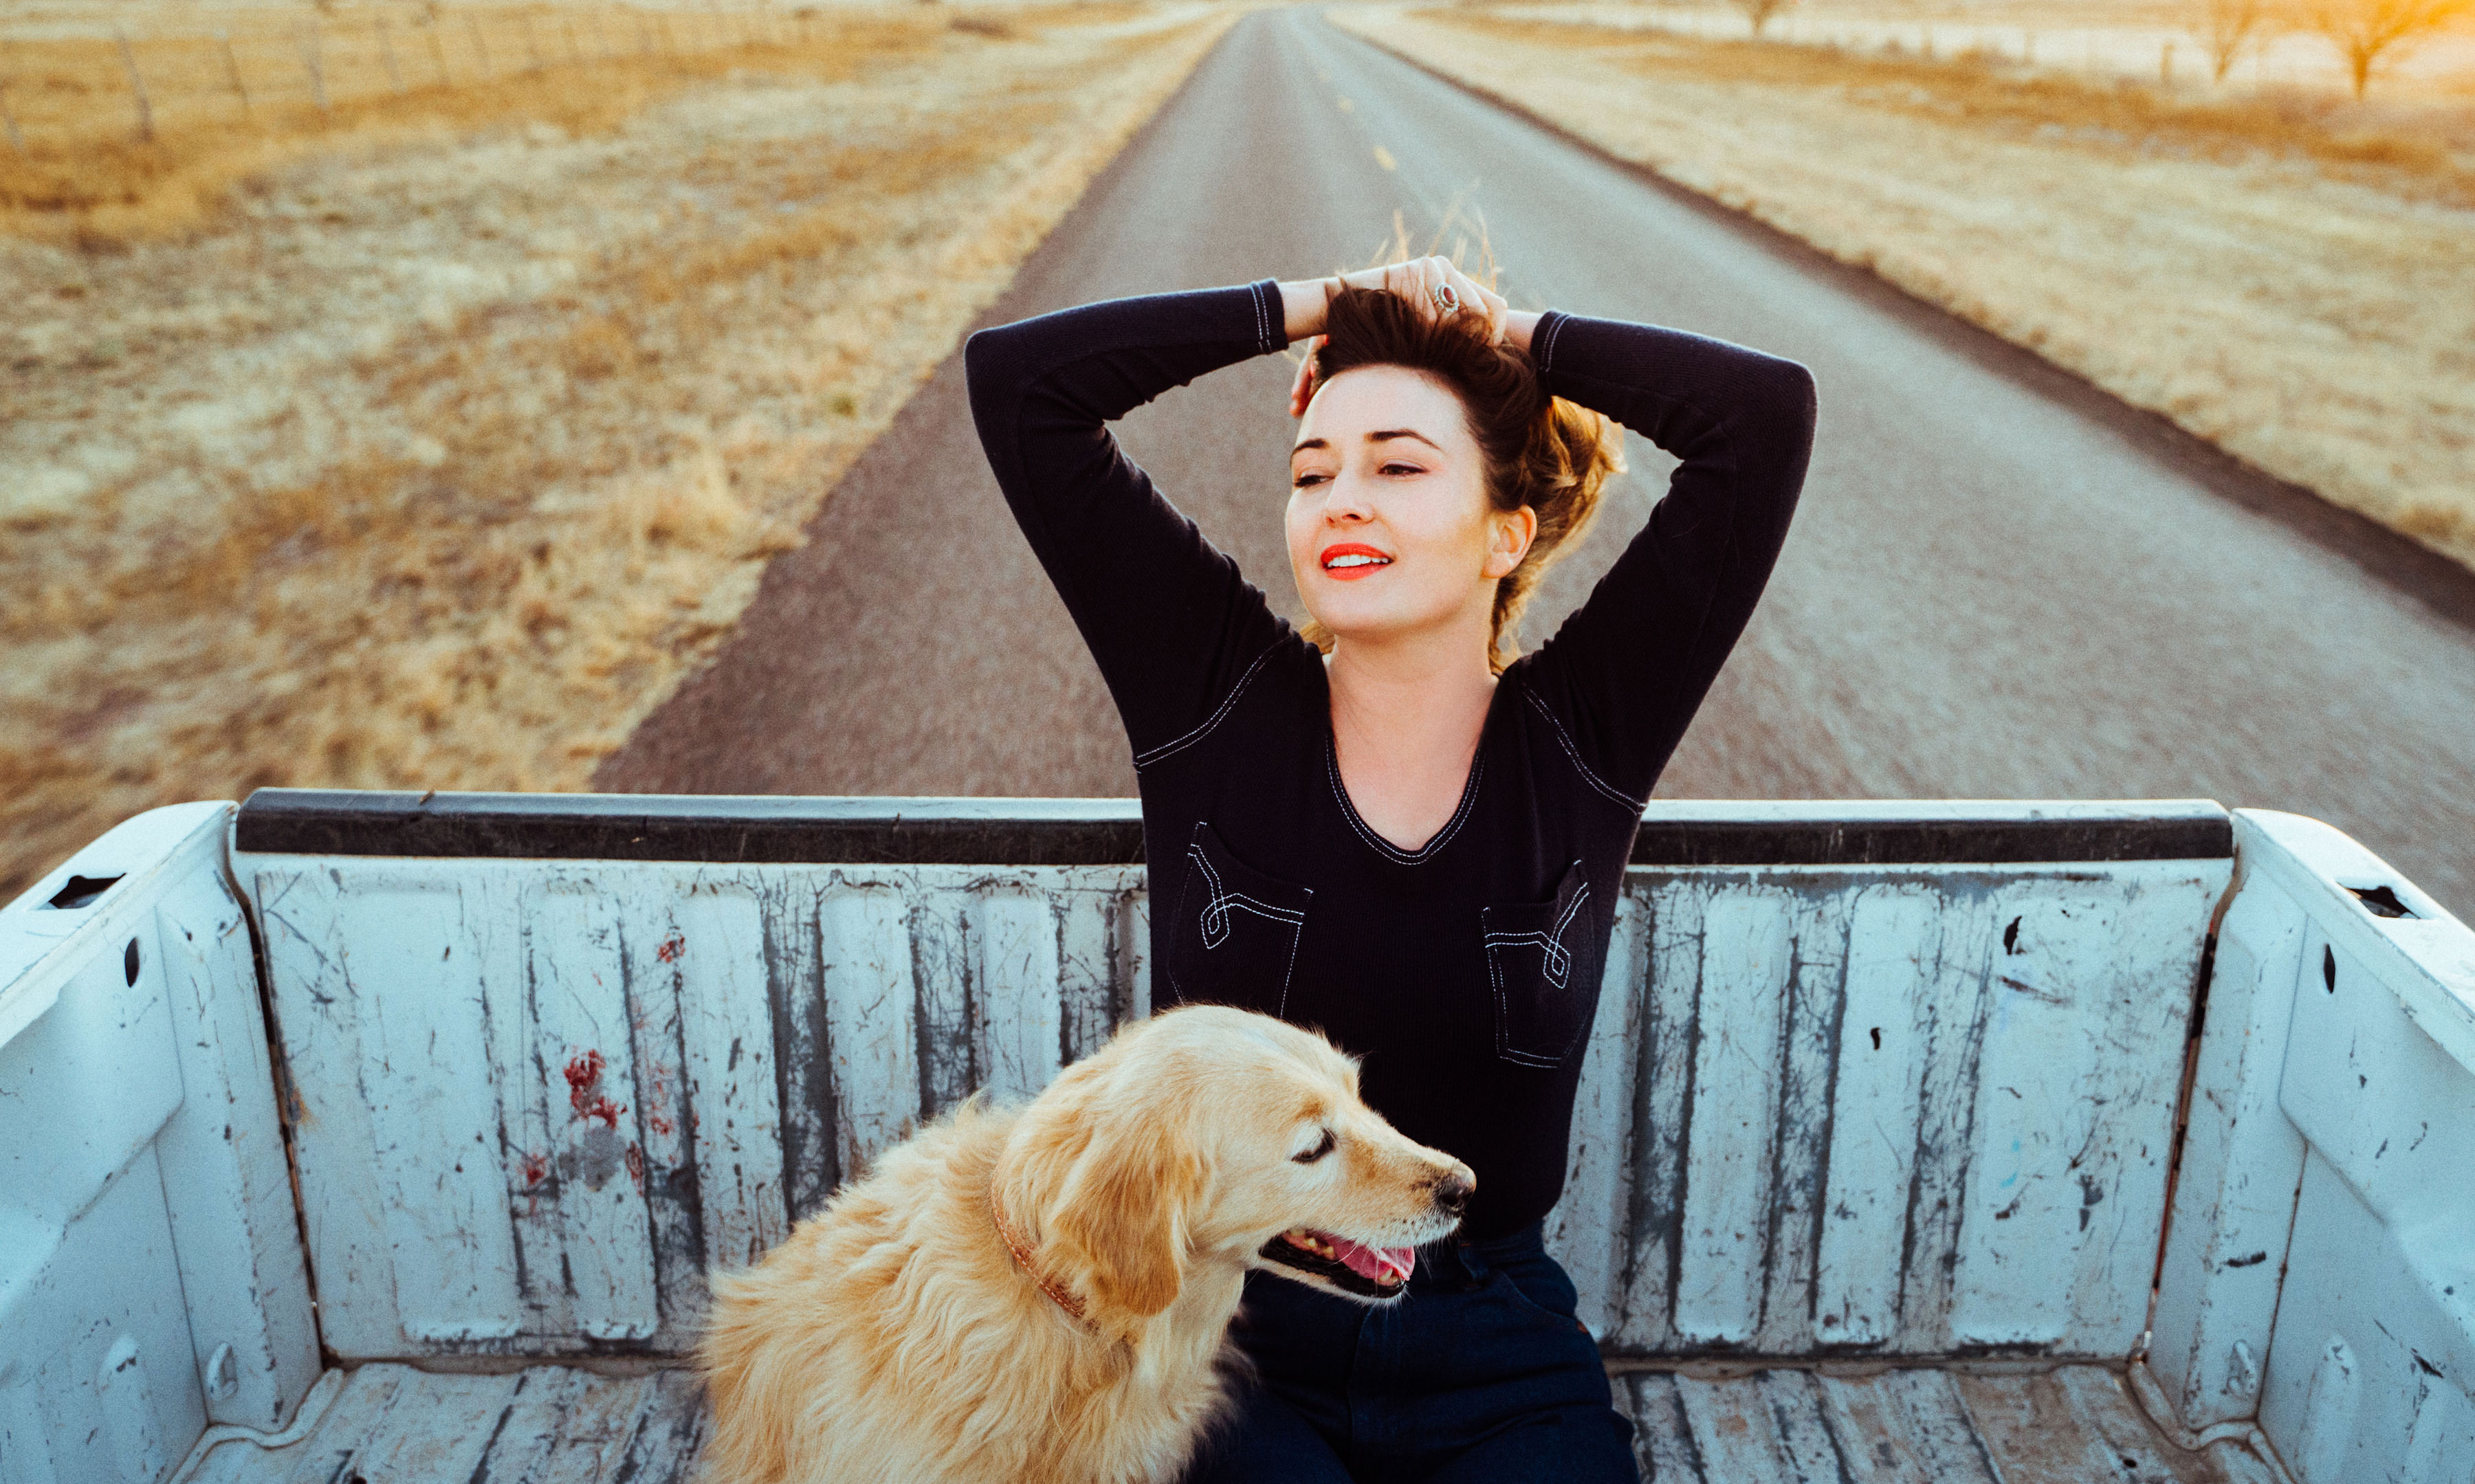 Jess Williamson reclines in the bed of a pick-up truck, with a dog in front of her.